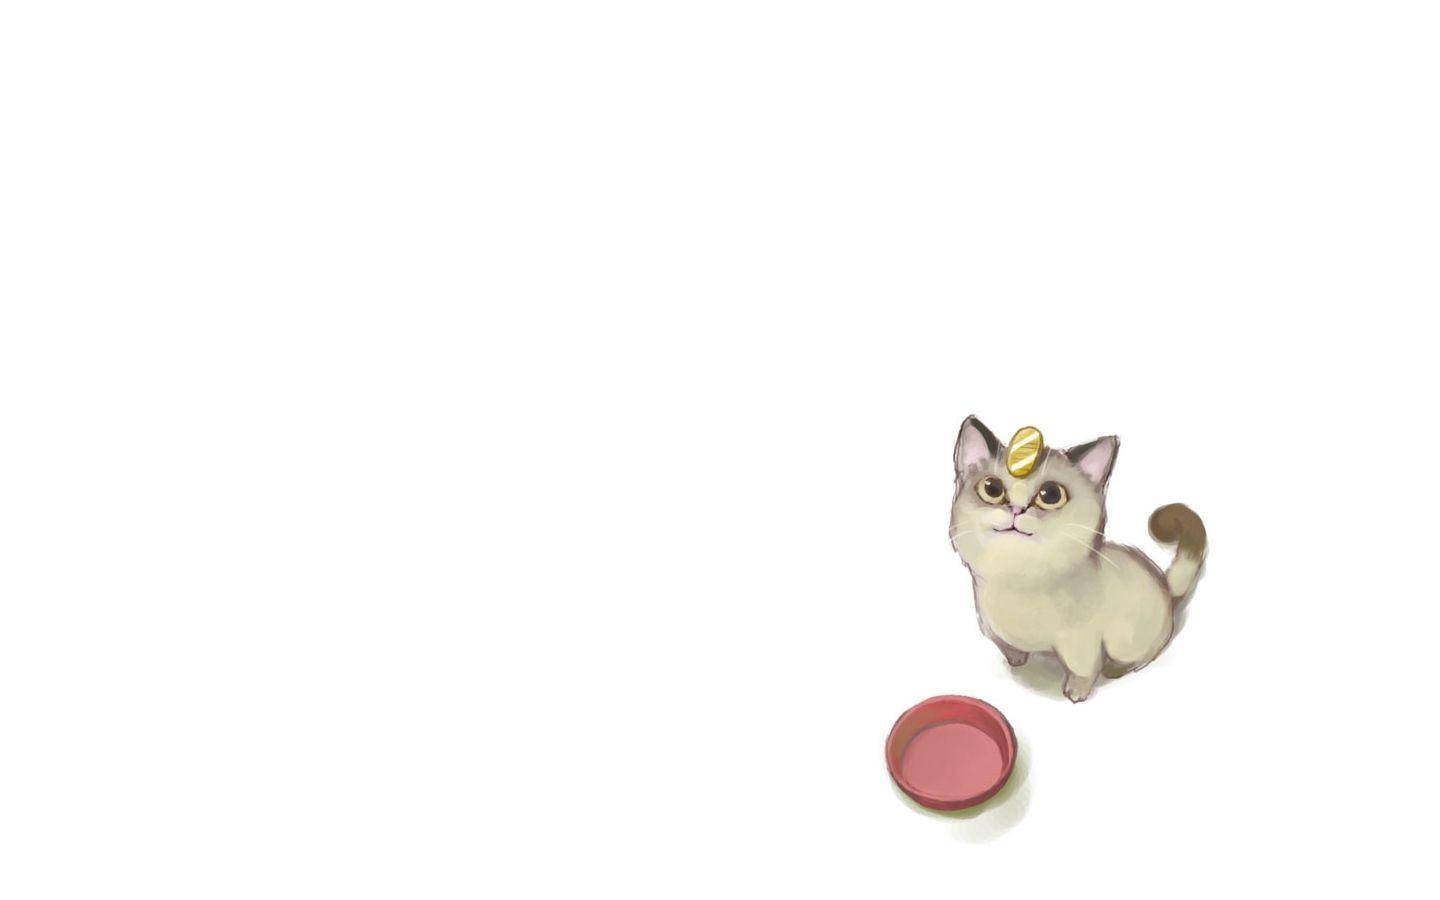 Meowth With Empty Food Bowl Wallpaper